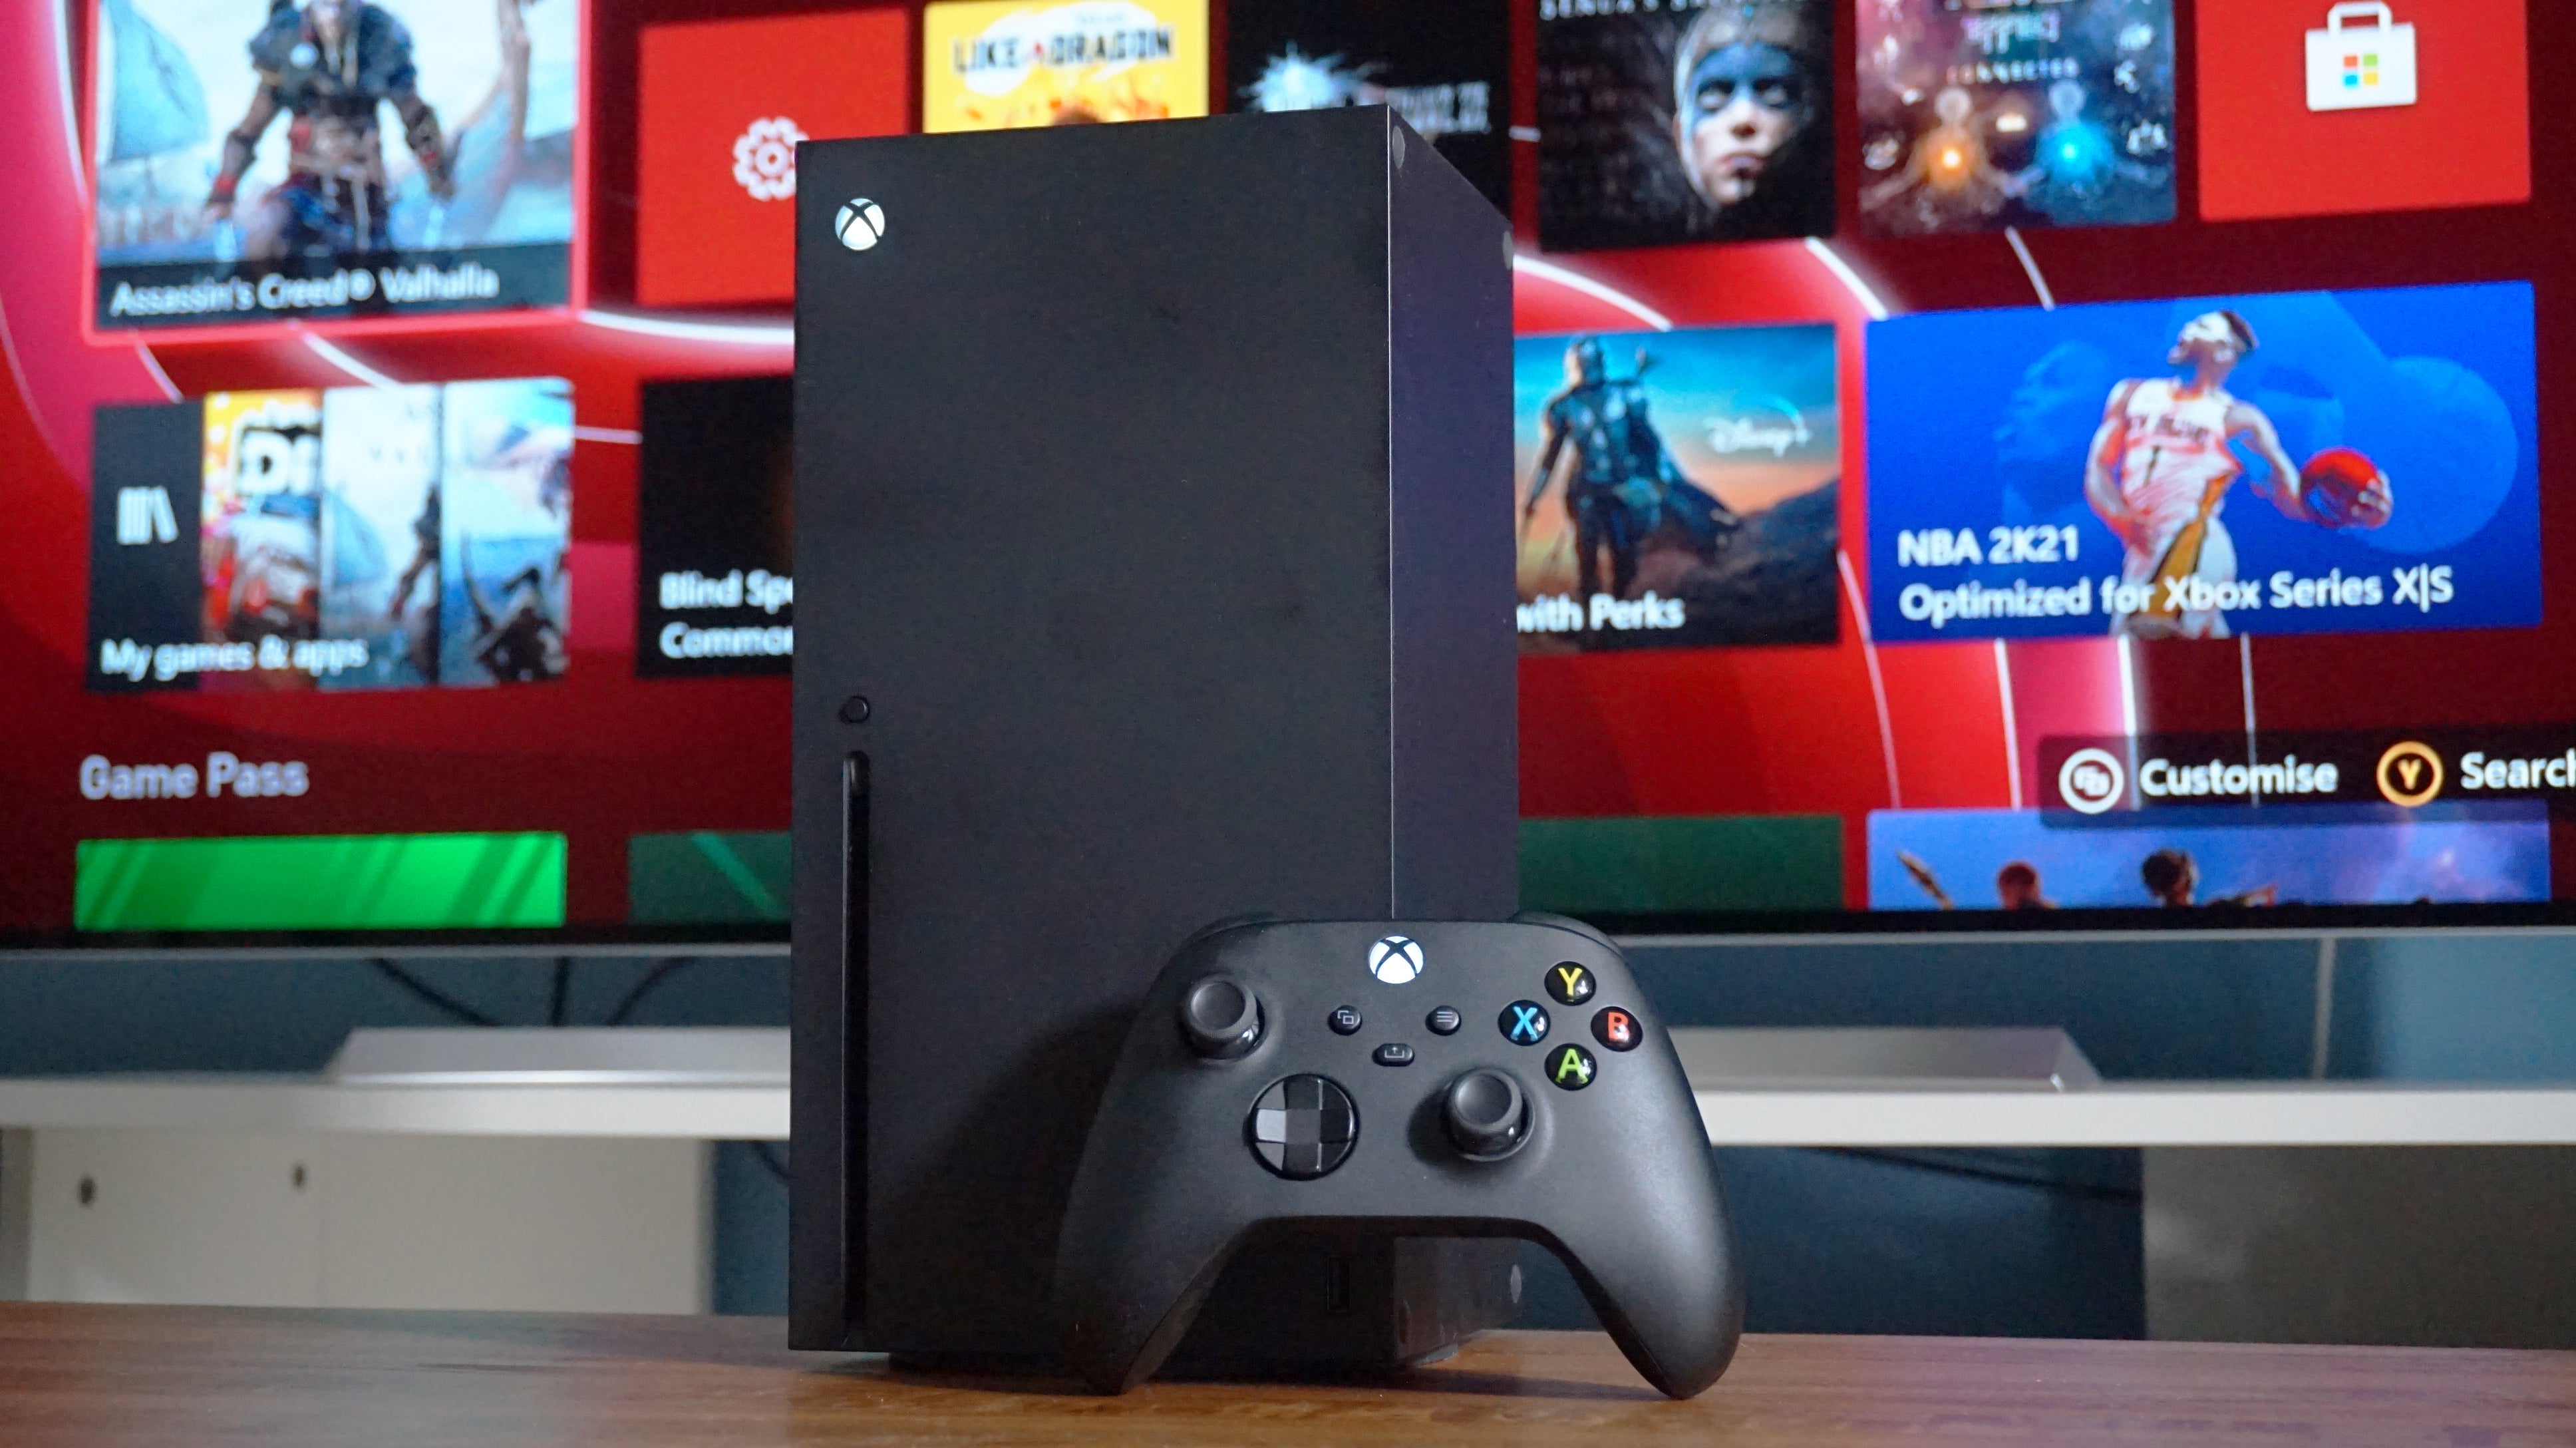 Foreman Extraordinary triangle Xbox Series X review: should PC gamers buy one? | Rock Paper Shotgun